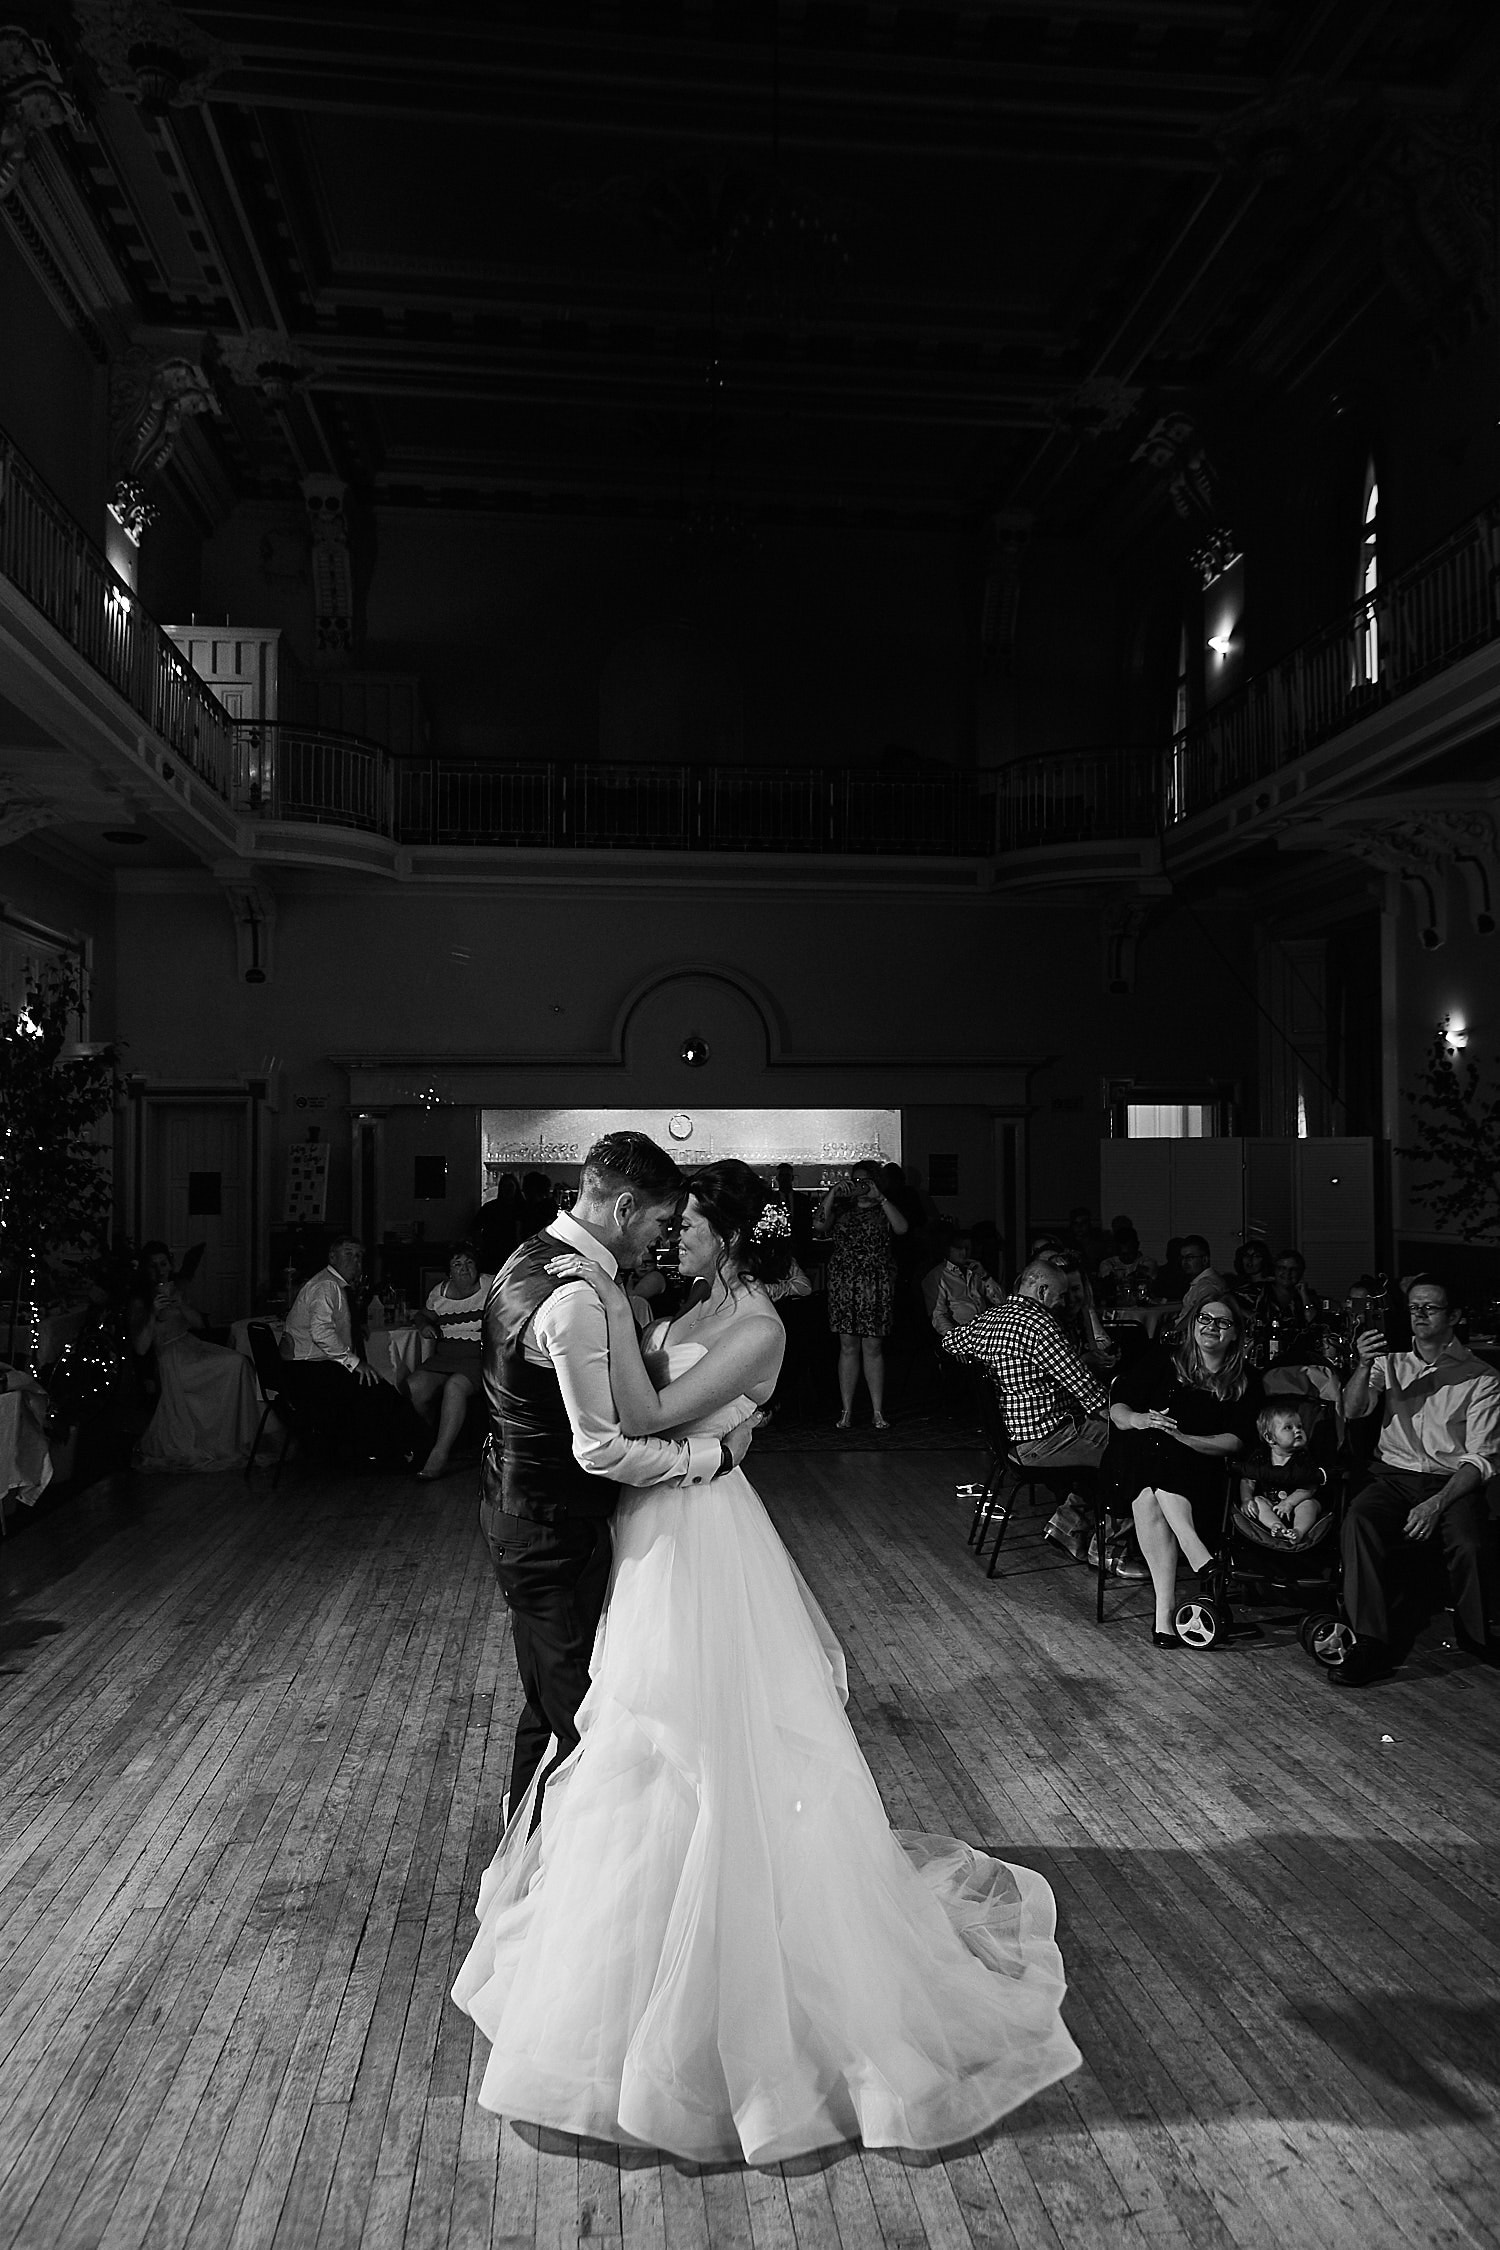 A couple share their first dance on their wedding day